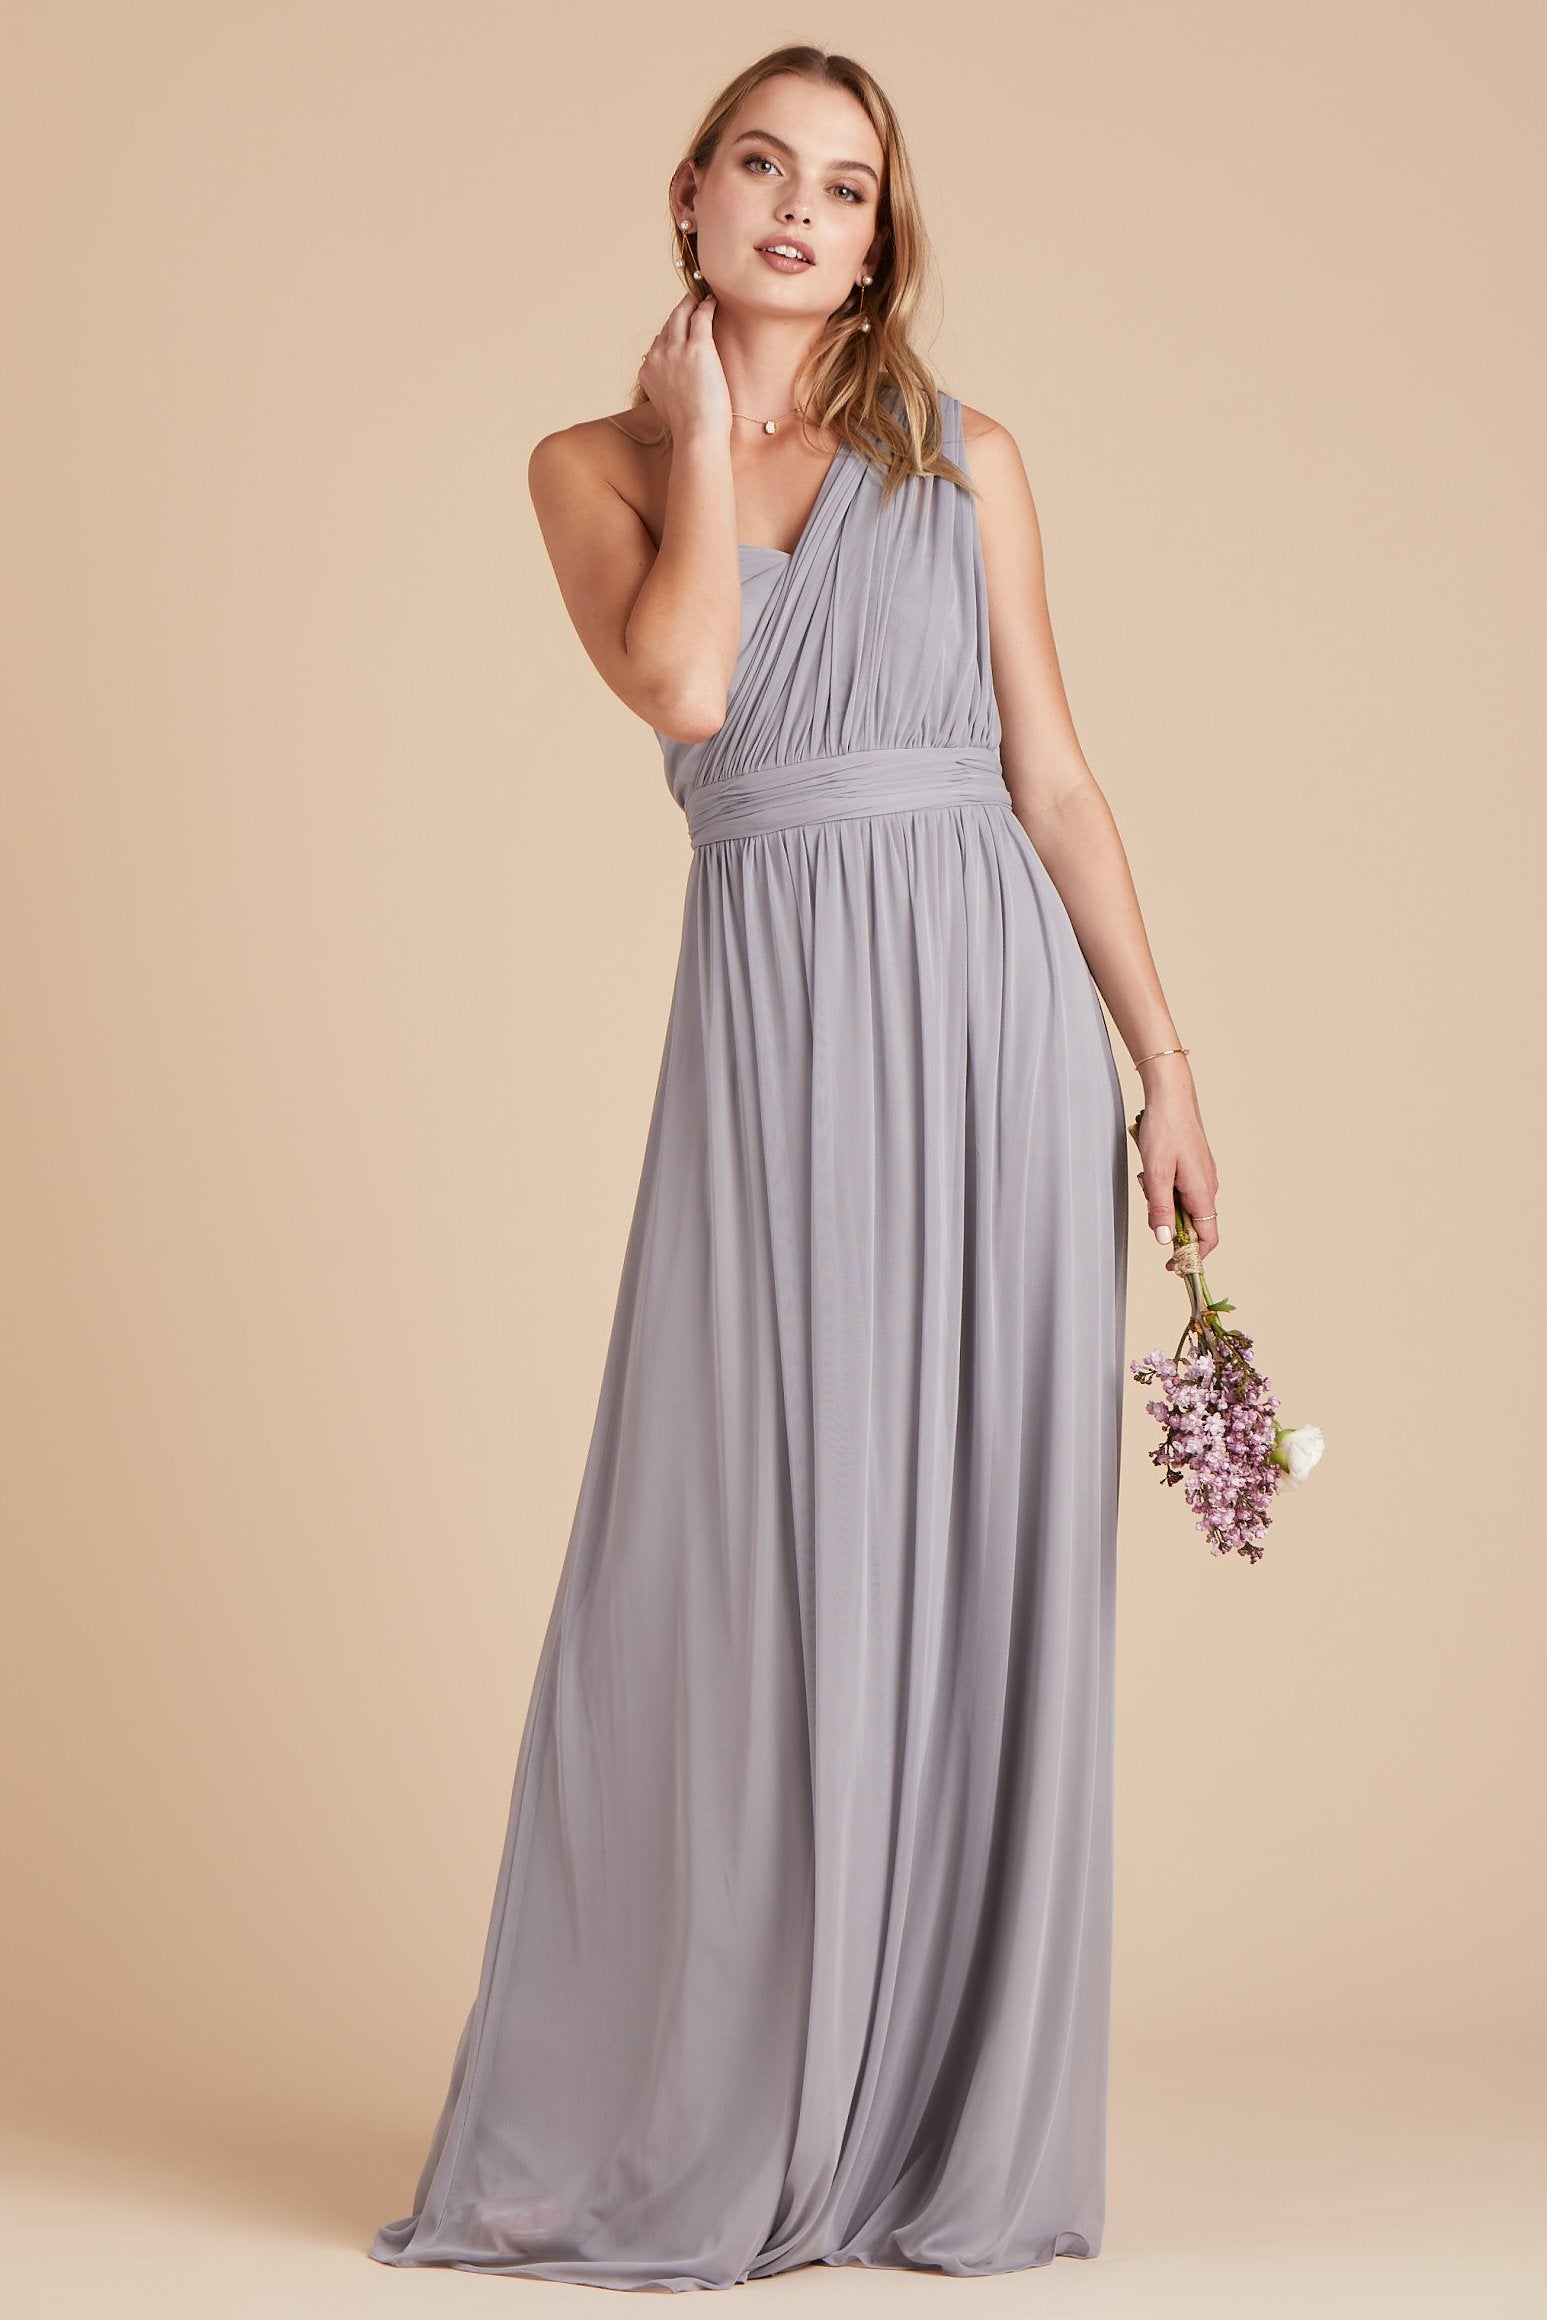 Chicky convertible bridesmaid dress in silver mesh by Birdy Grey, front view